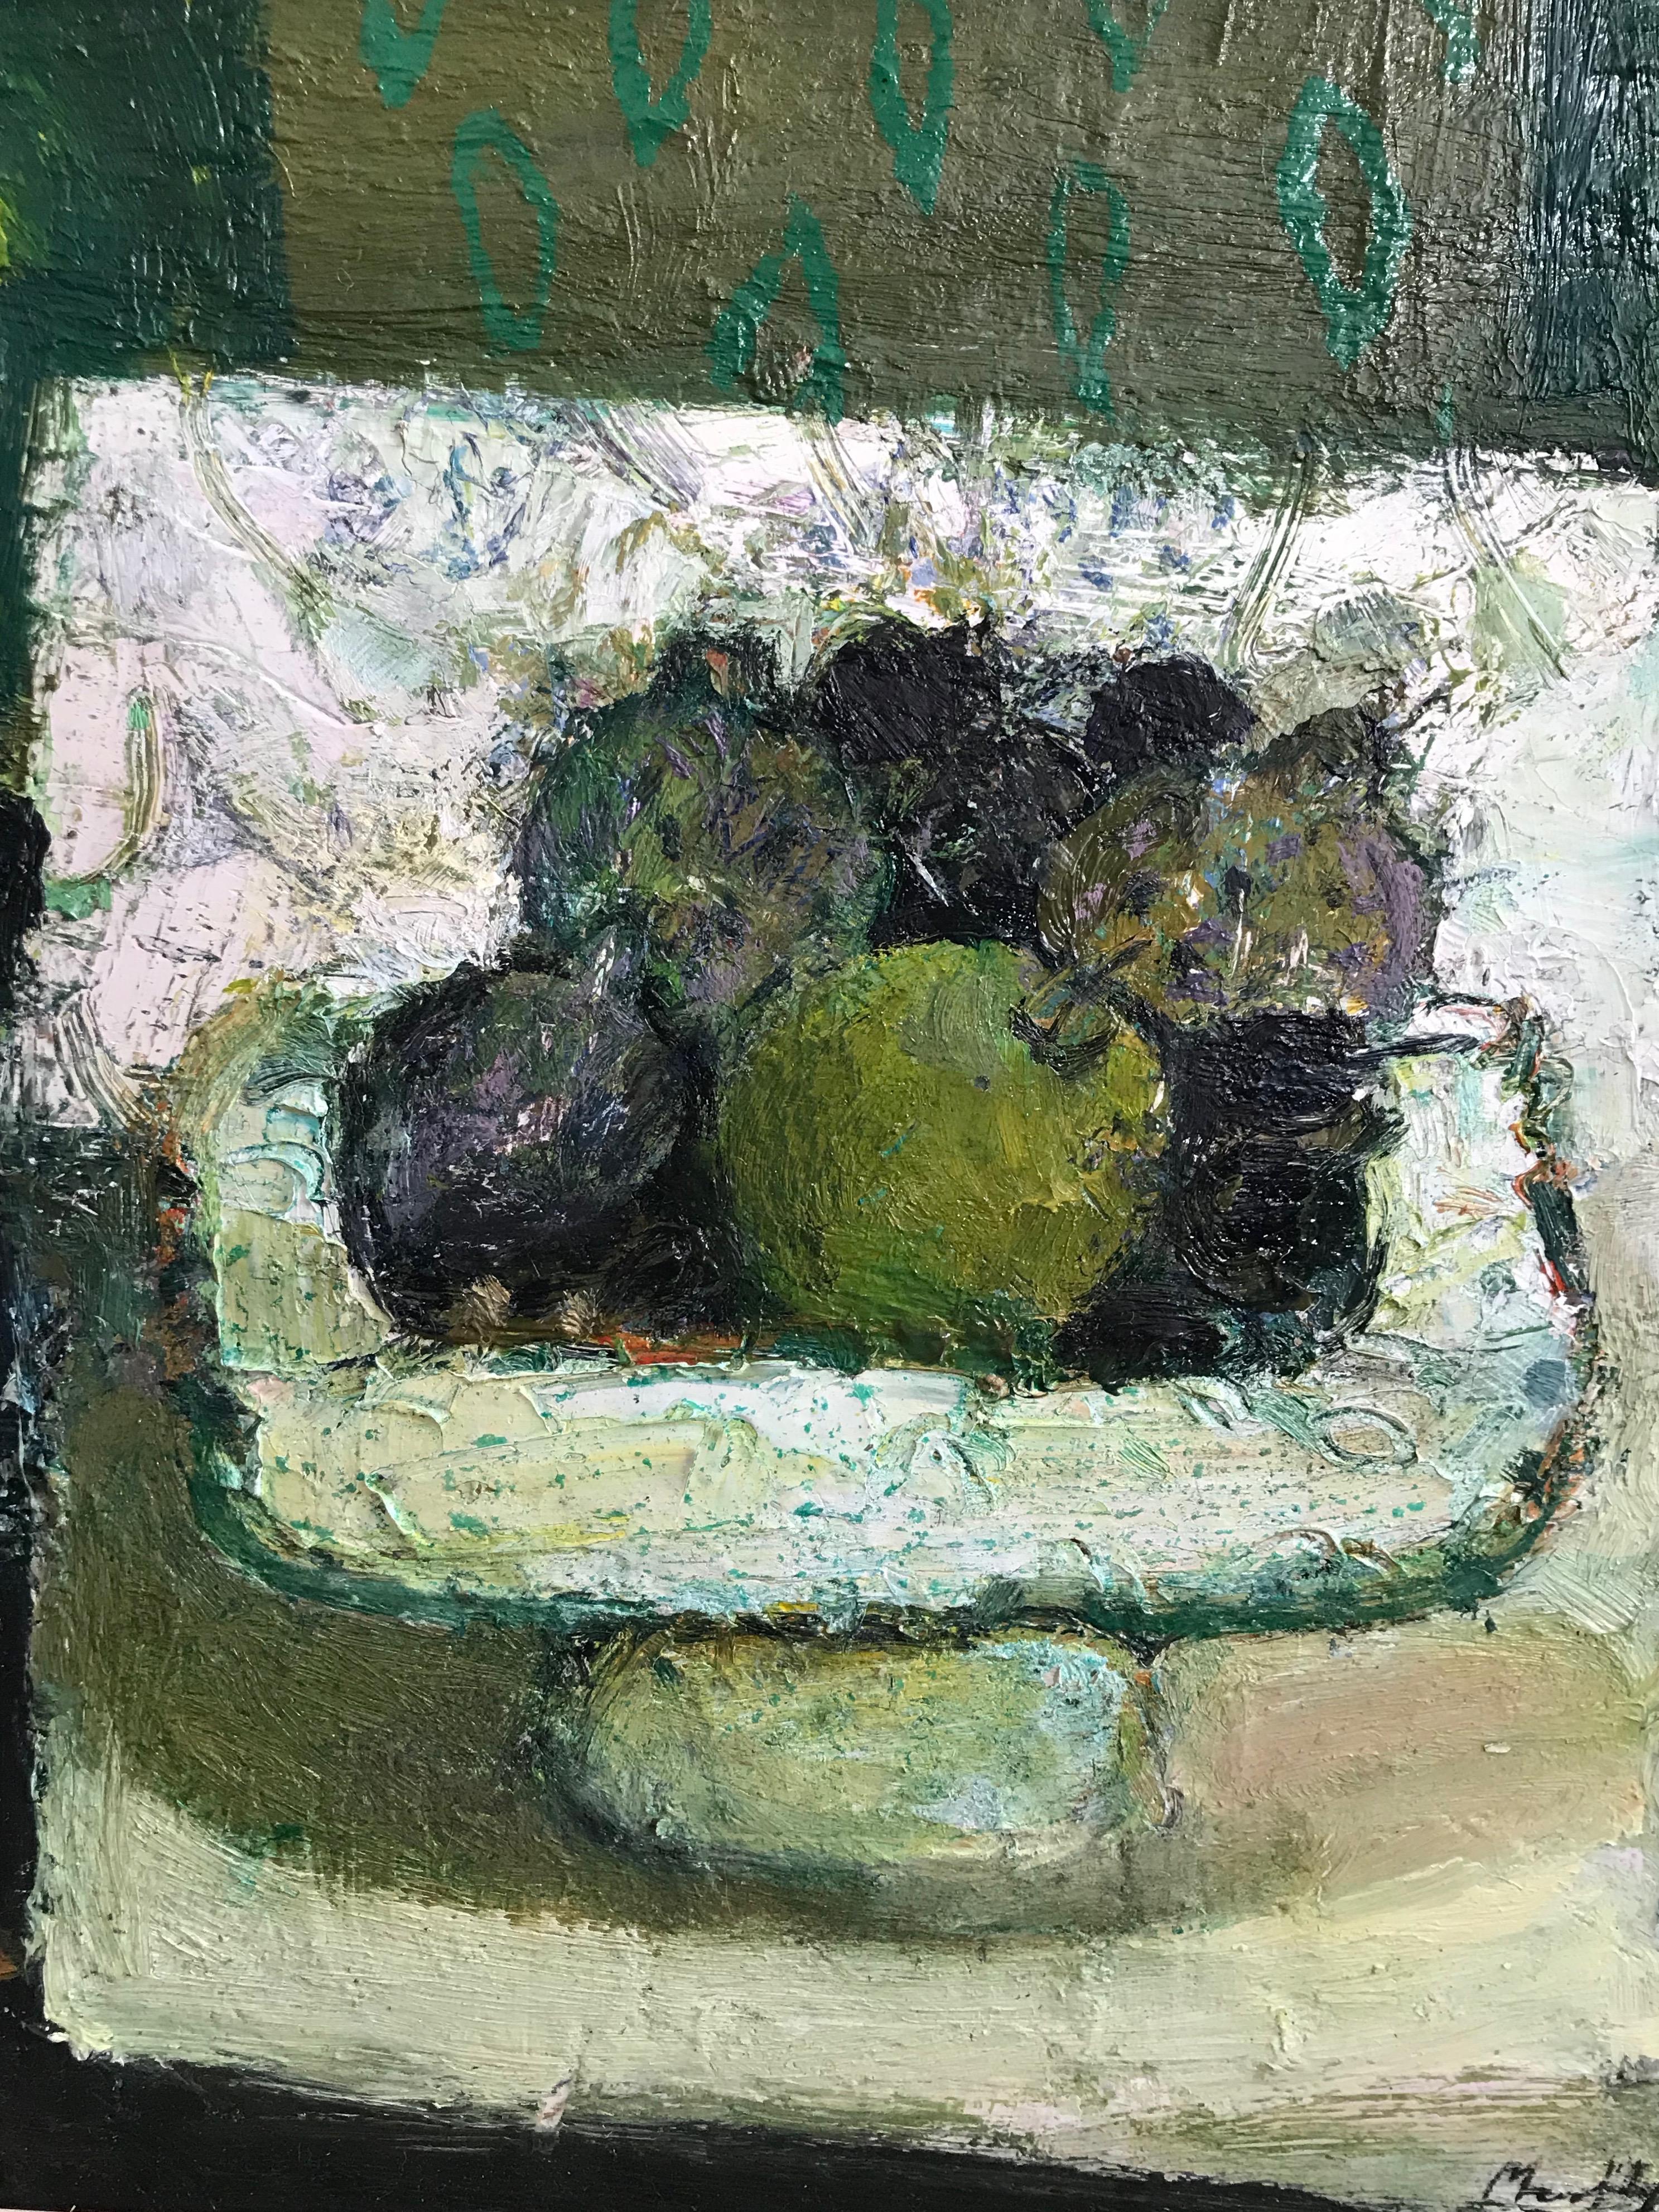 Sandy Murphy (born 1956)
A still life of apples
Signed
Oil on board
13 x 14¼ inches

A very striking image with attractive green tones and fabulous paint texture.
​
Sandy Murphy is a contemporary Scottish artist and was born in Ayrshire, Scotland in